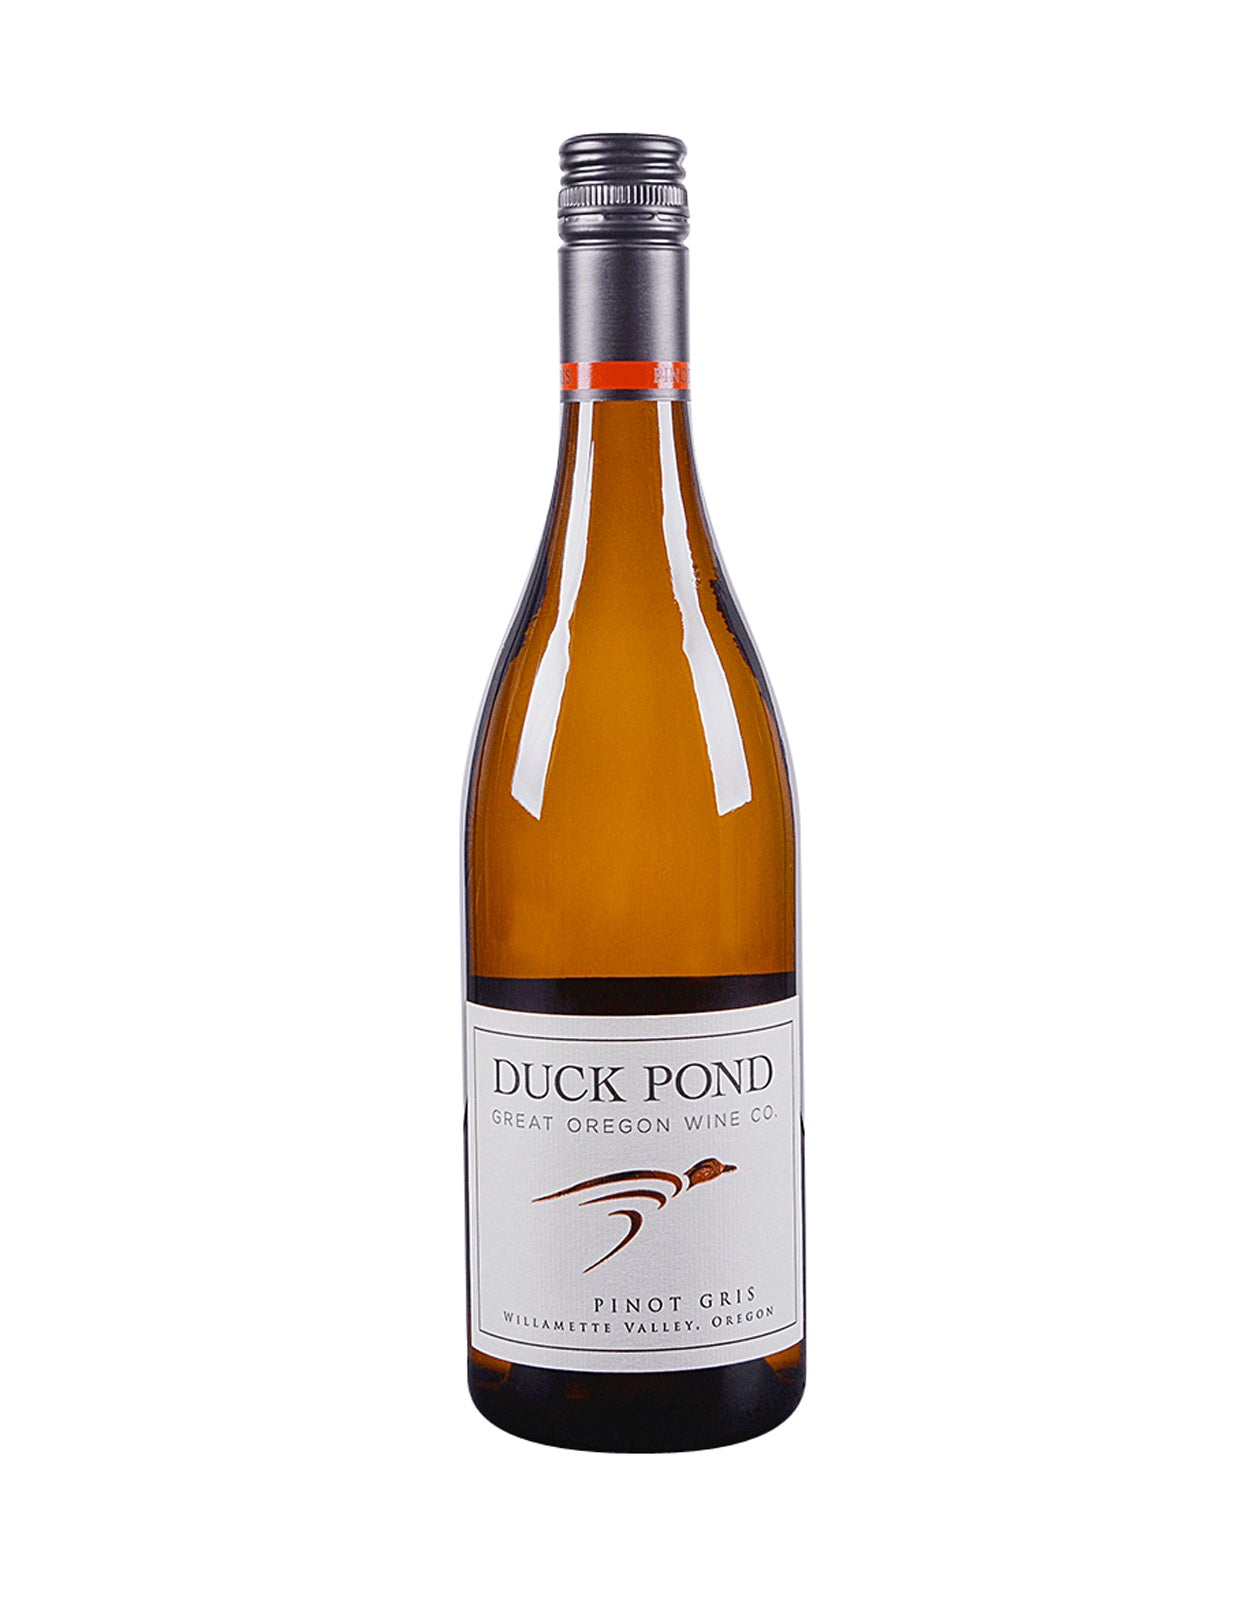 Duck Pond Pinot Gris 2021